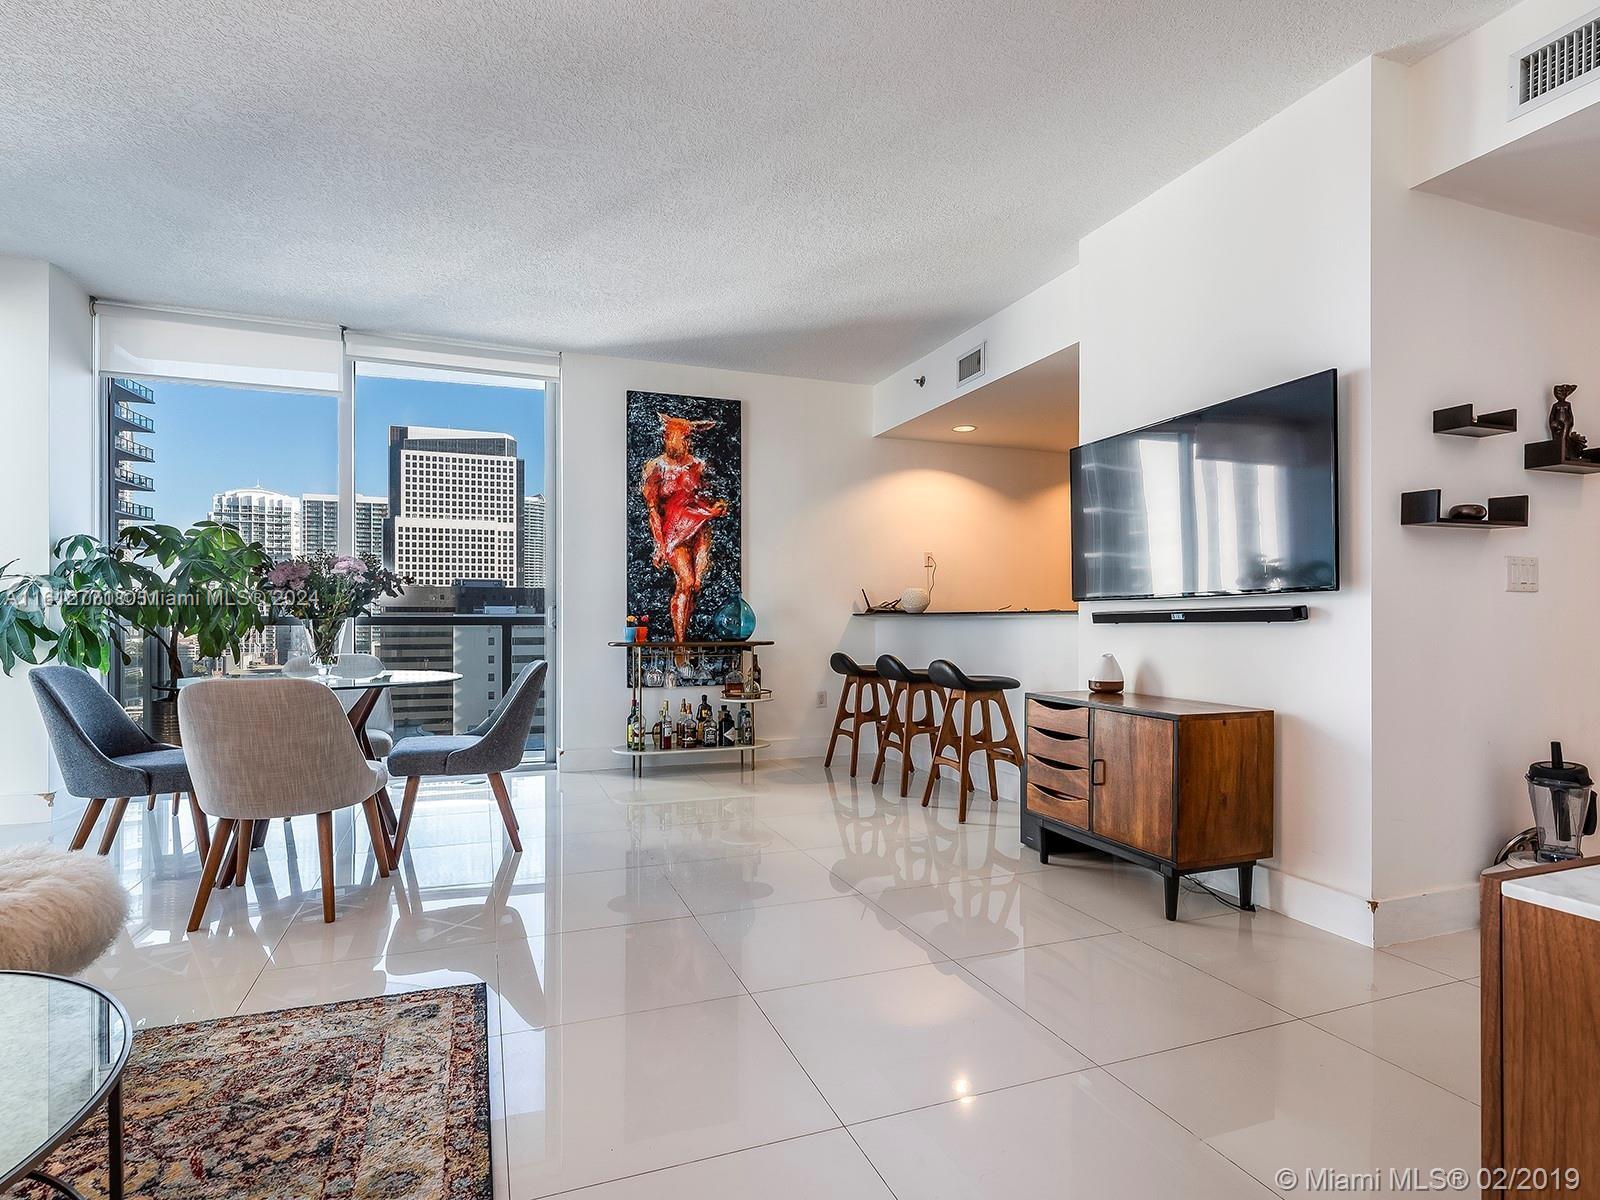 Welcome to the absolute best deal for a spacious 2bed/2.5bath corner unit located directly in Mary Brickell Village and steps to Brickell City Center at 1060 Brickell. Features include, floor to ceiling windows, white porcelain tile floors, upgraded appliances, great views the city, skyline and pool. Additional features include: large master bedroom with walk in closet, large luxury master bathroom with separate shower and tub, spacious guest bedroom, additional half bath for guests and more. Have access to hotel style amenities including, pool, gym, spa, party room and more. Ideally located in the best location in Brickell steps to all of the shops in Mary Brickell Village, walking distance to City Center, close to metro mover, highway and airport.